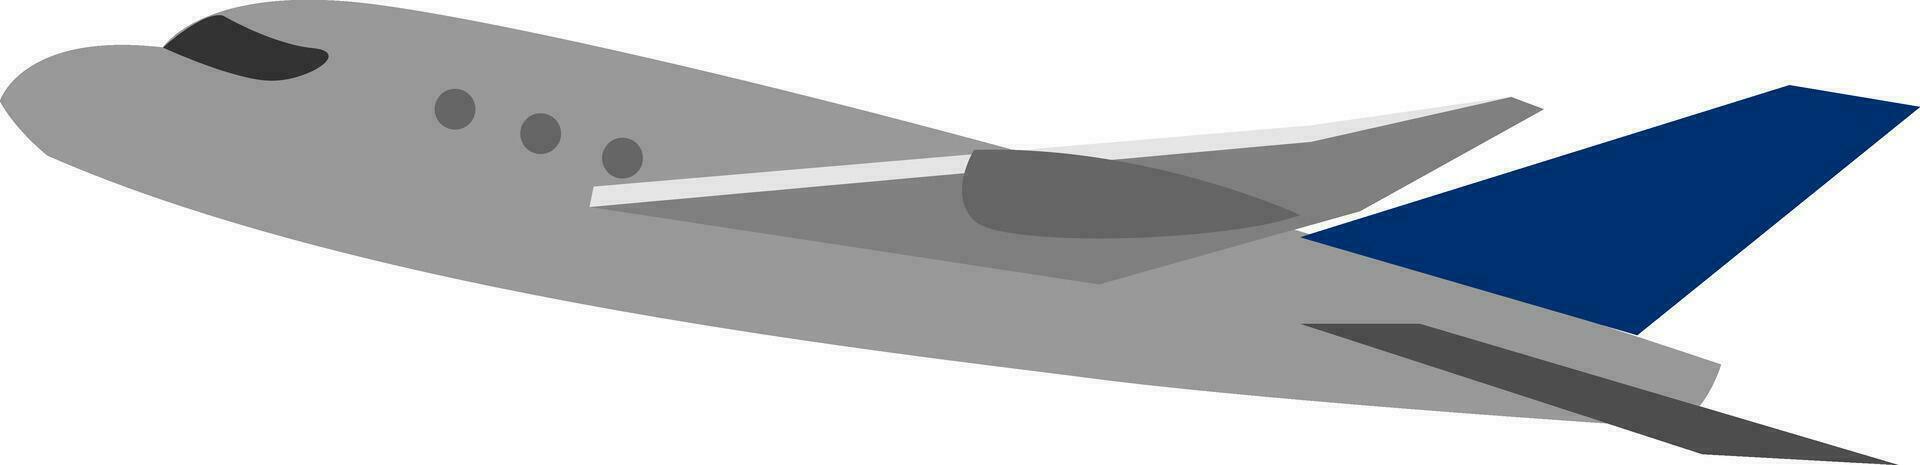 Grey-colored aircraft vector or color illustration